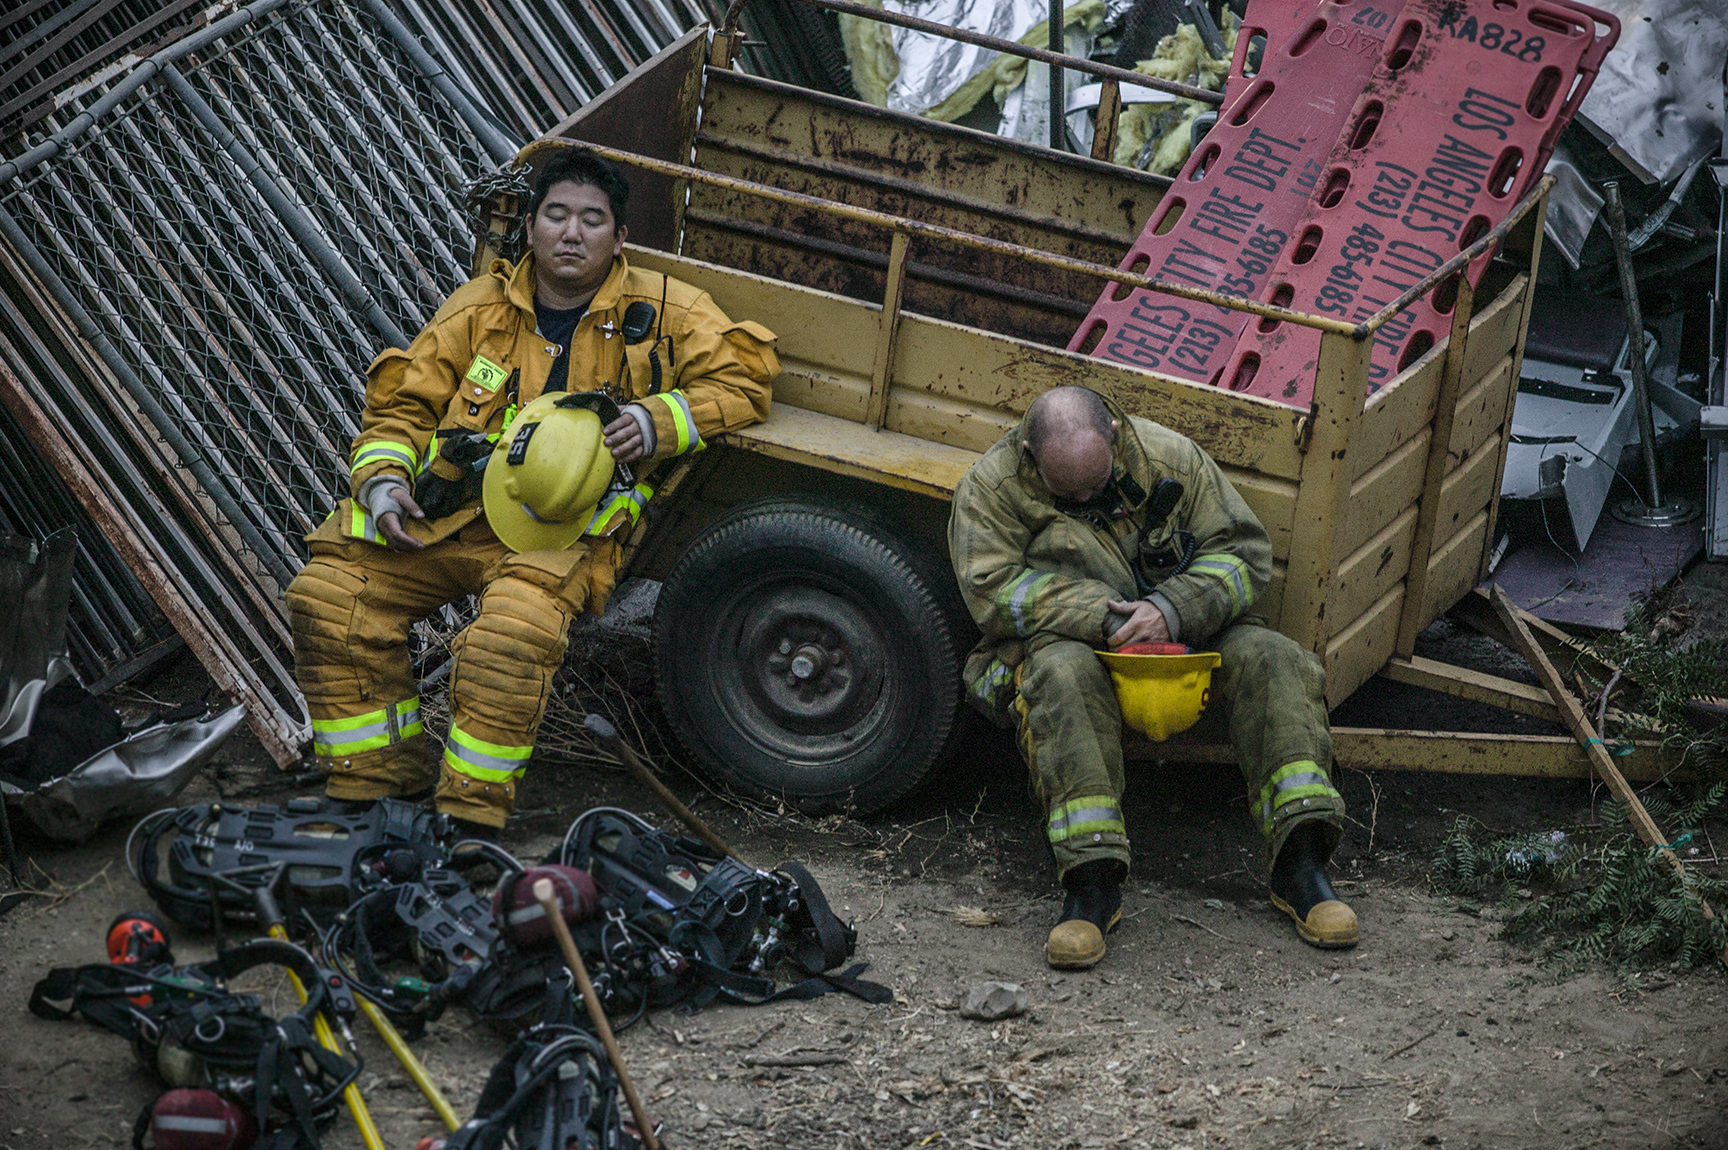  Exhausted firefighters find a moment of rest at the scene of a deadly train crash where 25 people lost their lives.&nbsp; 